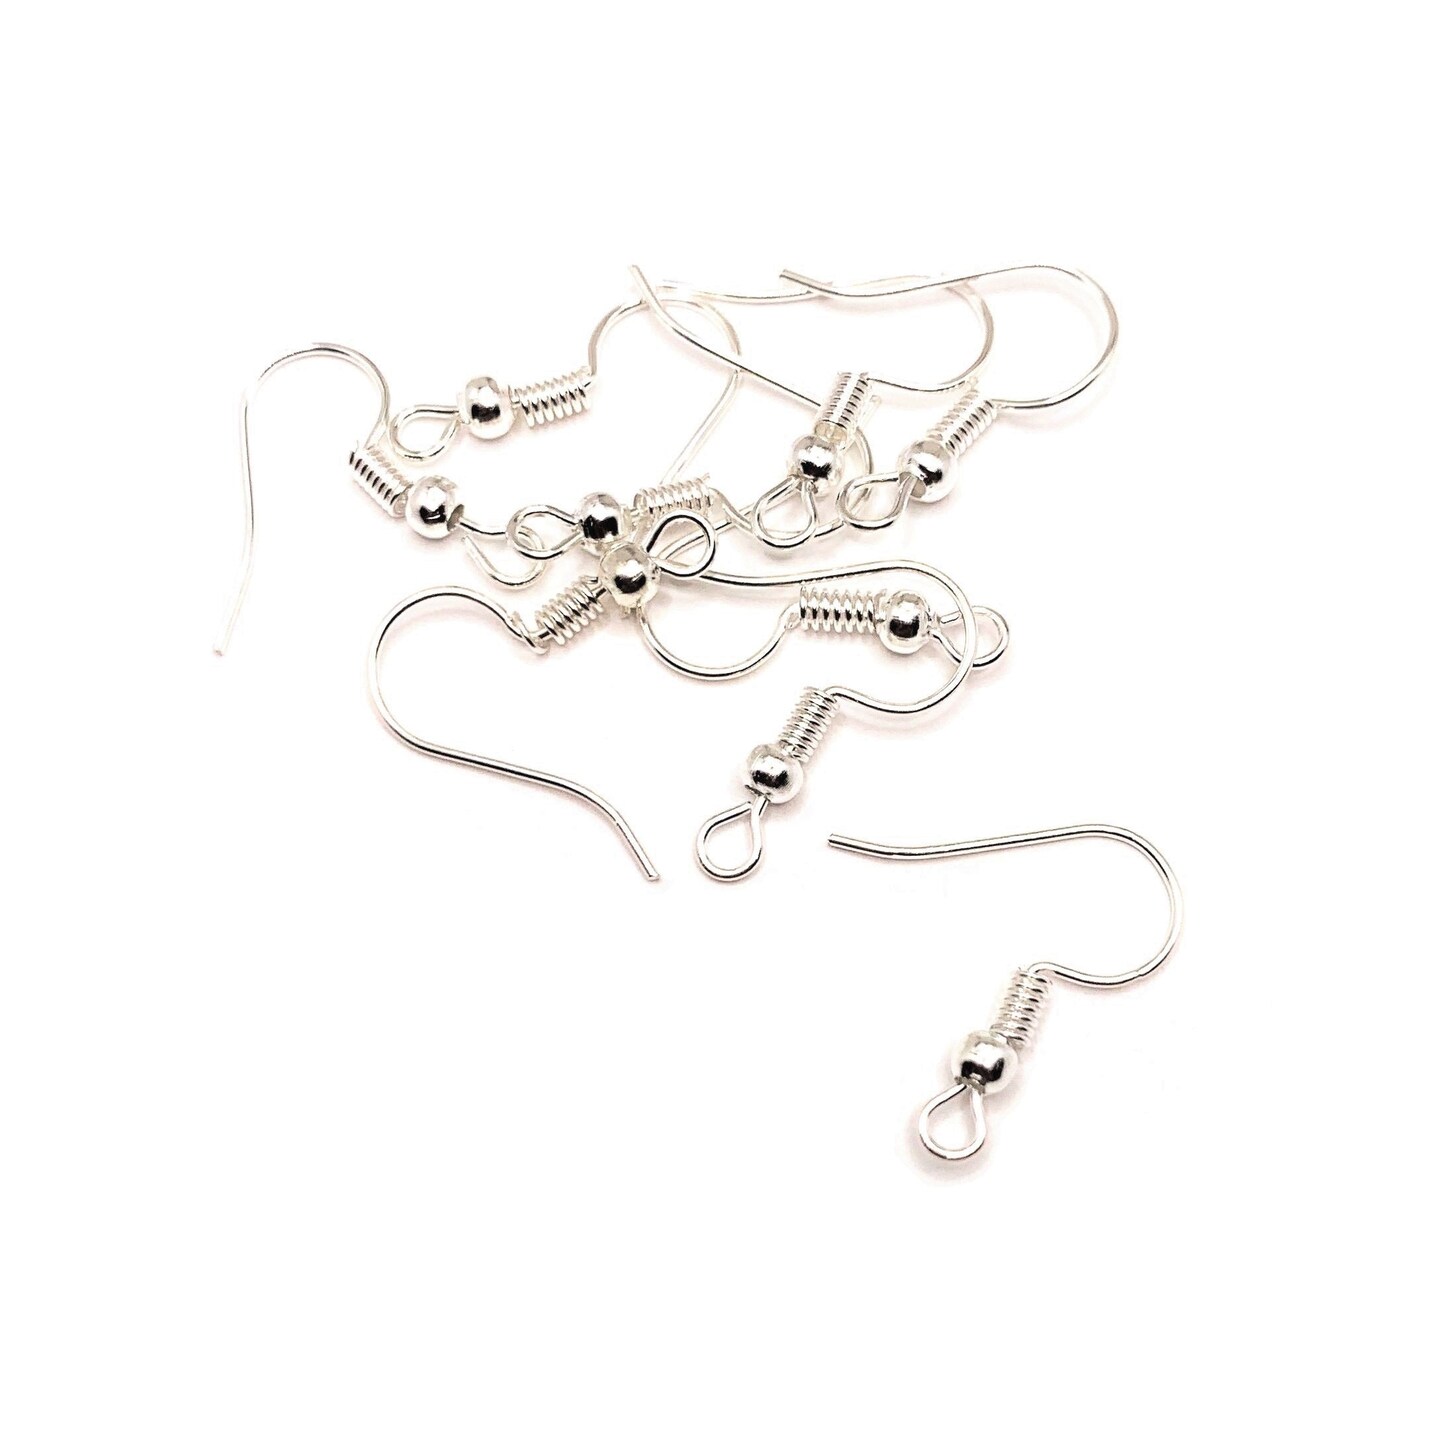 100 or 500 Pieces: Bright Silver Plated Fish Hook Earring Wires with